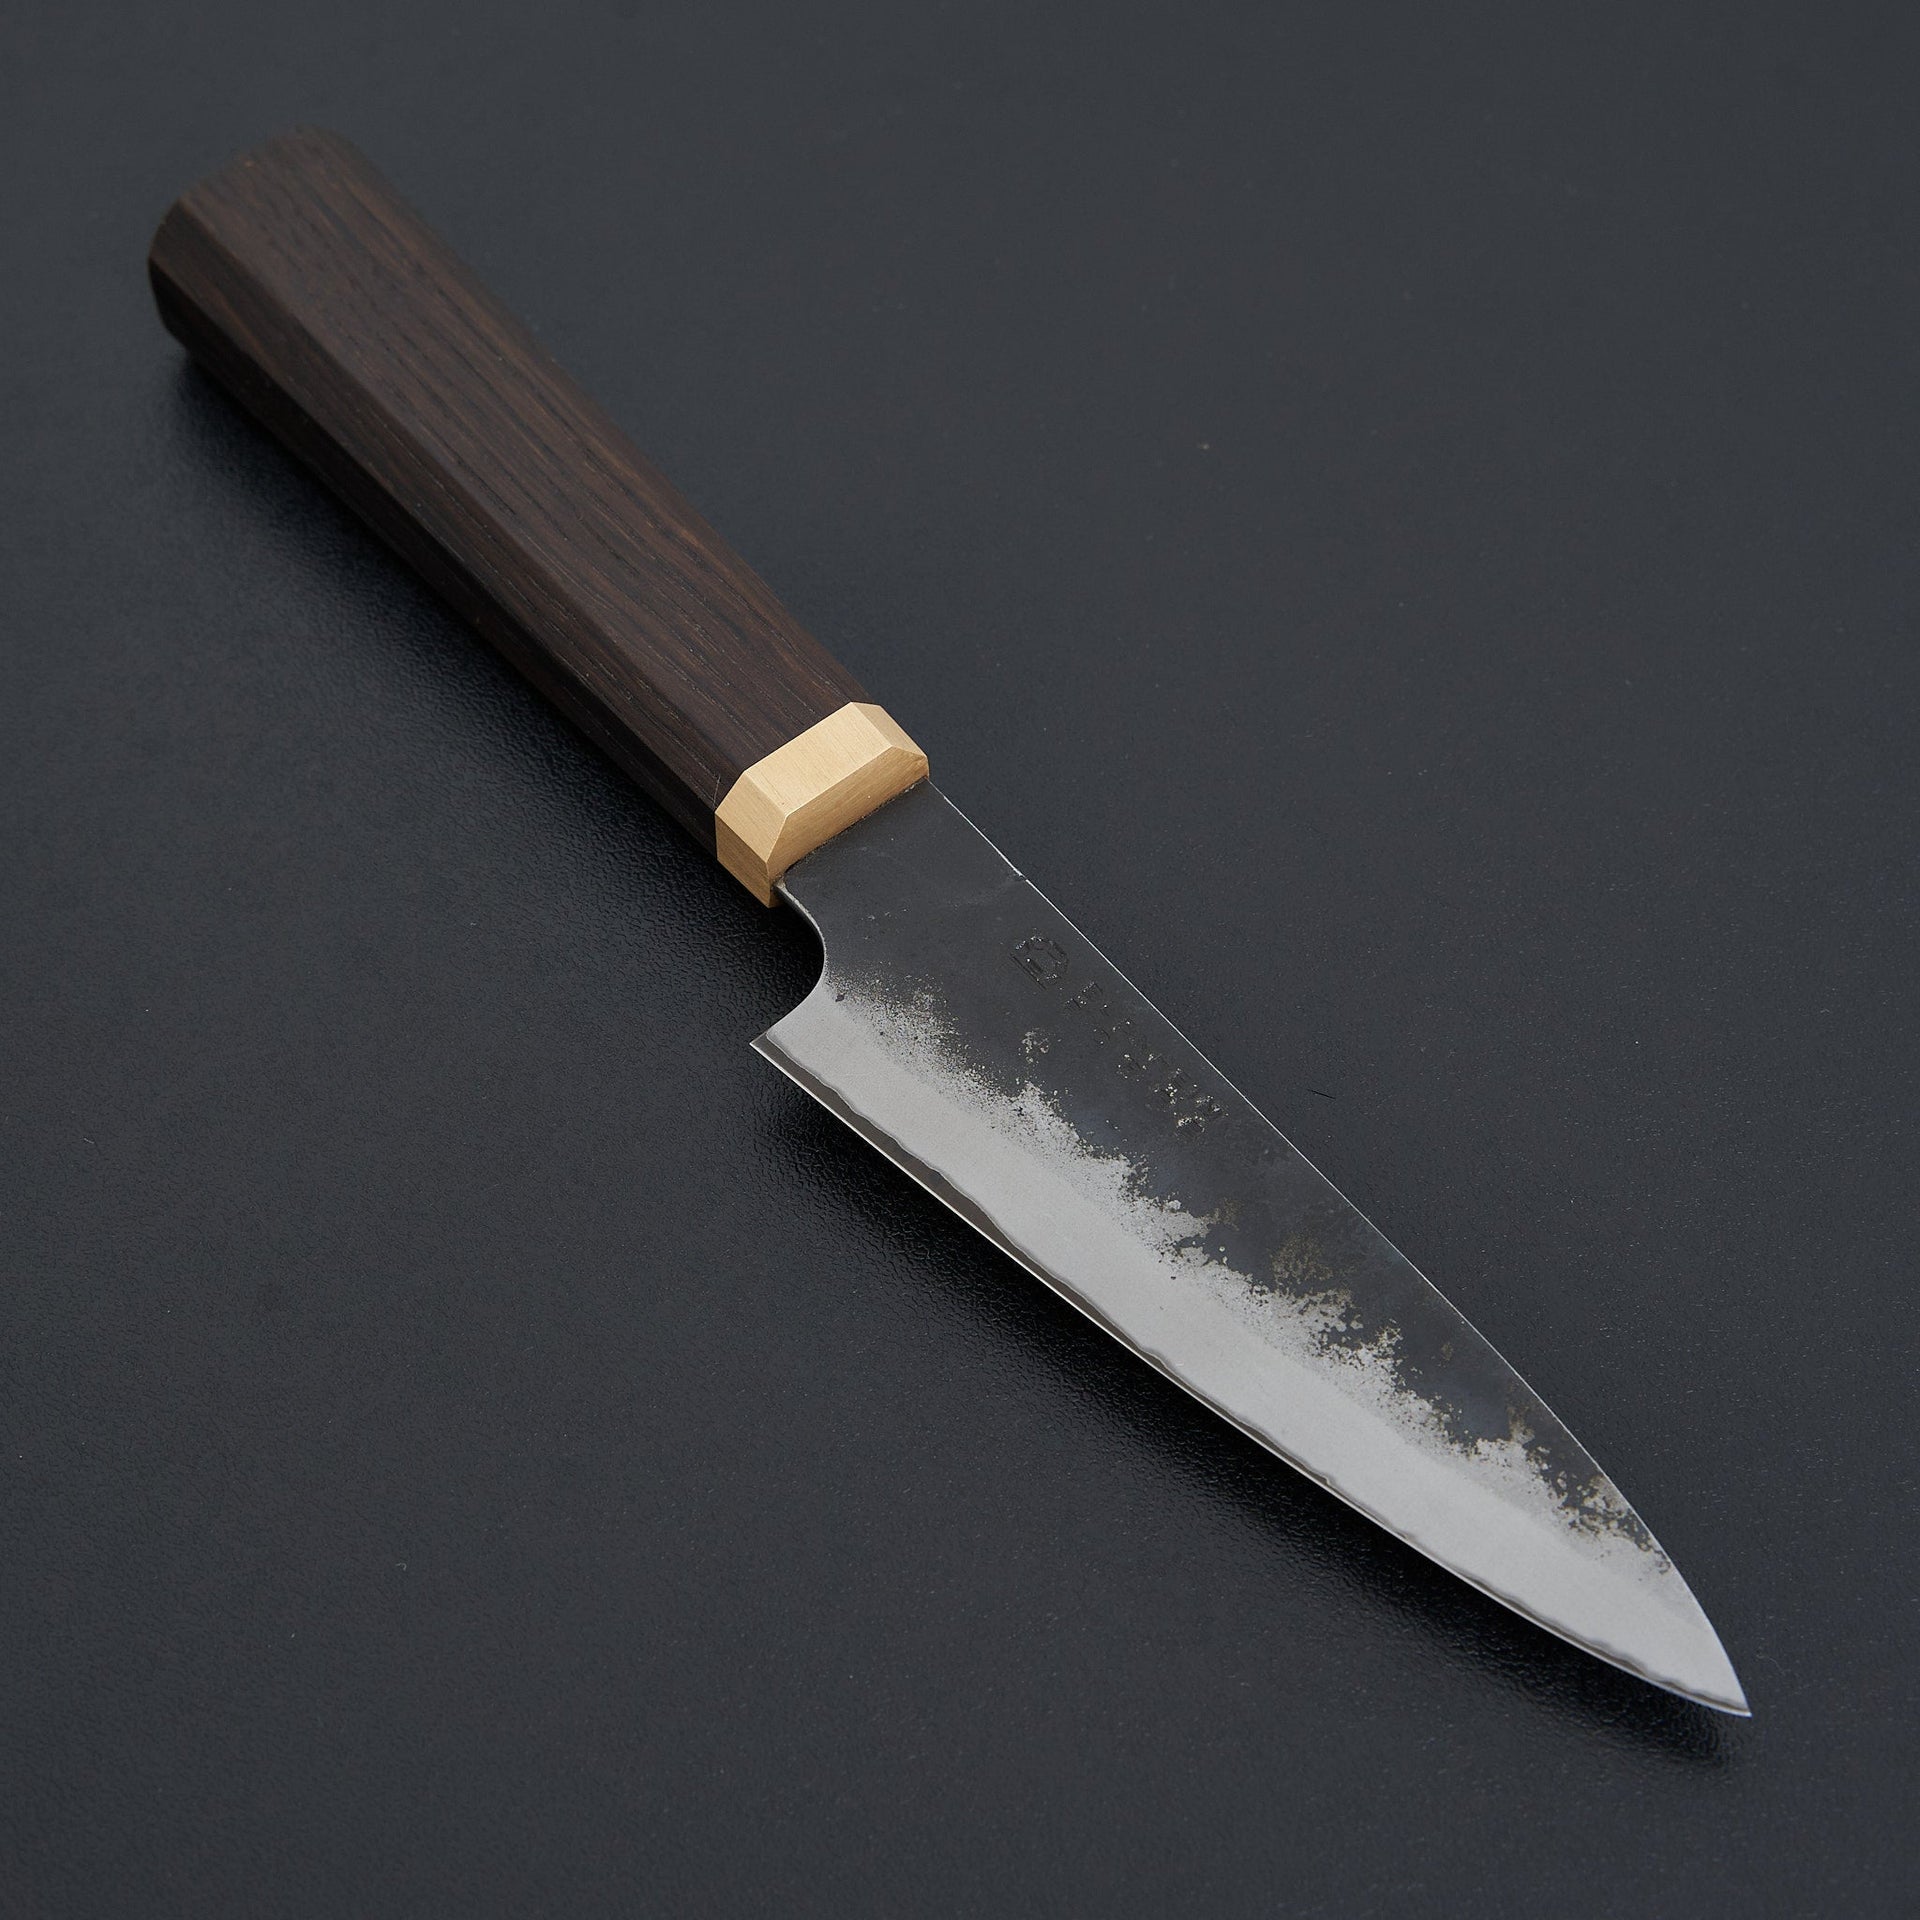 Blenheim Forge Stainless Clad Petty 125mm-Knife-Blenheim Forge-Carbon Knife Co